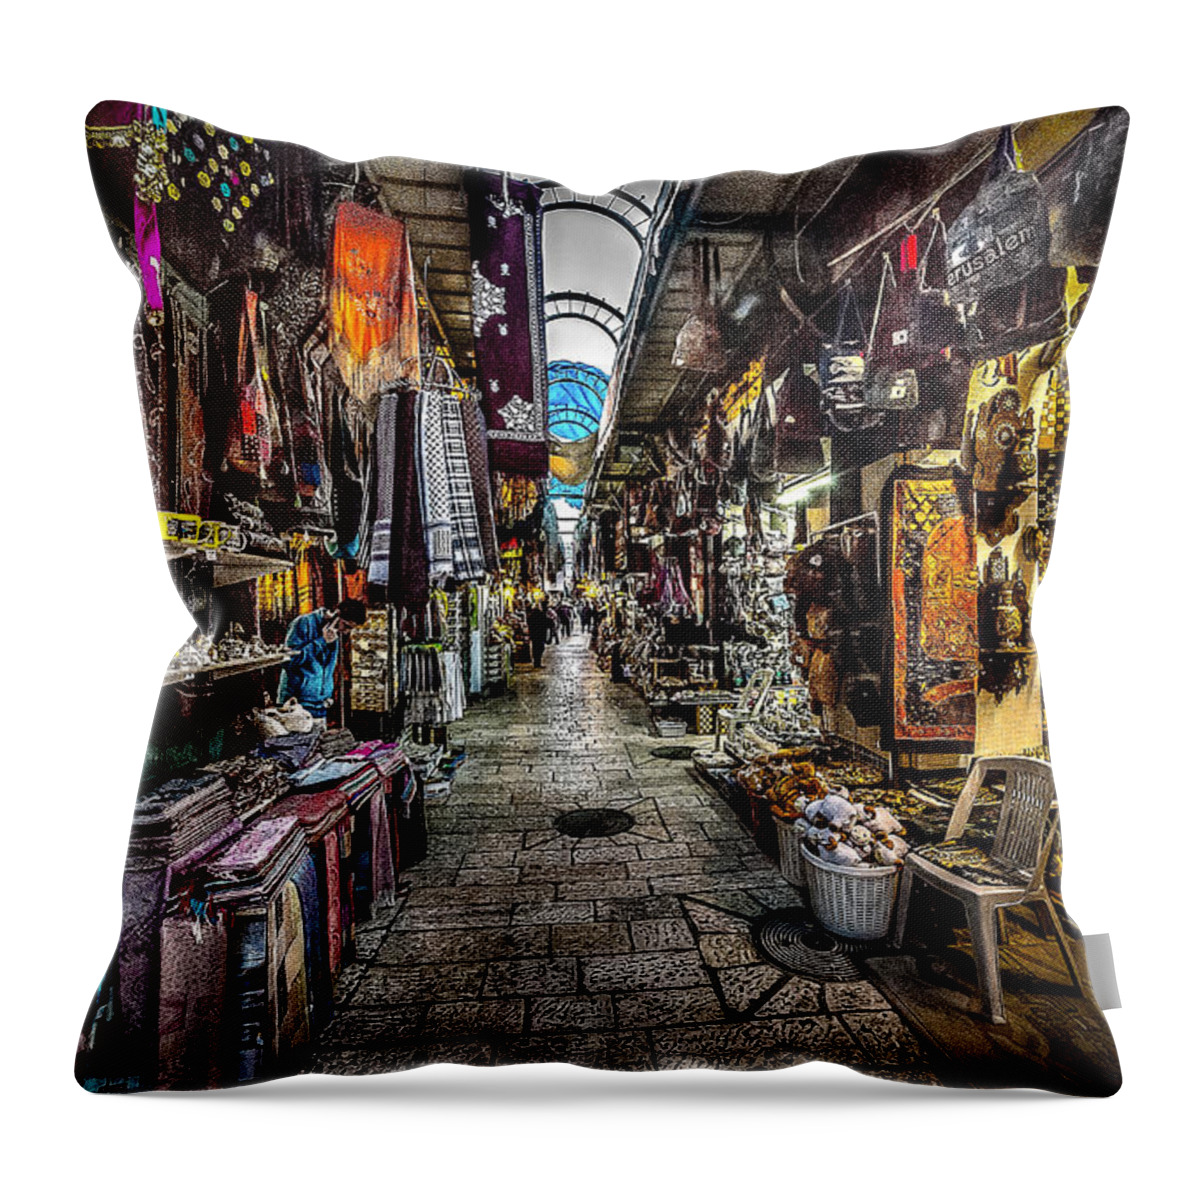 Jerusalem Throw Pillow featuring the photograph Market in the Old City of Jerusalem by David Morefield